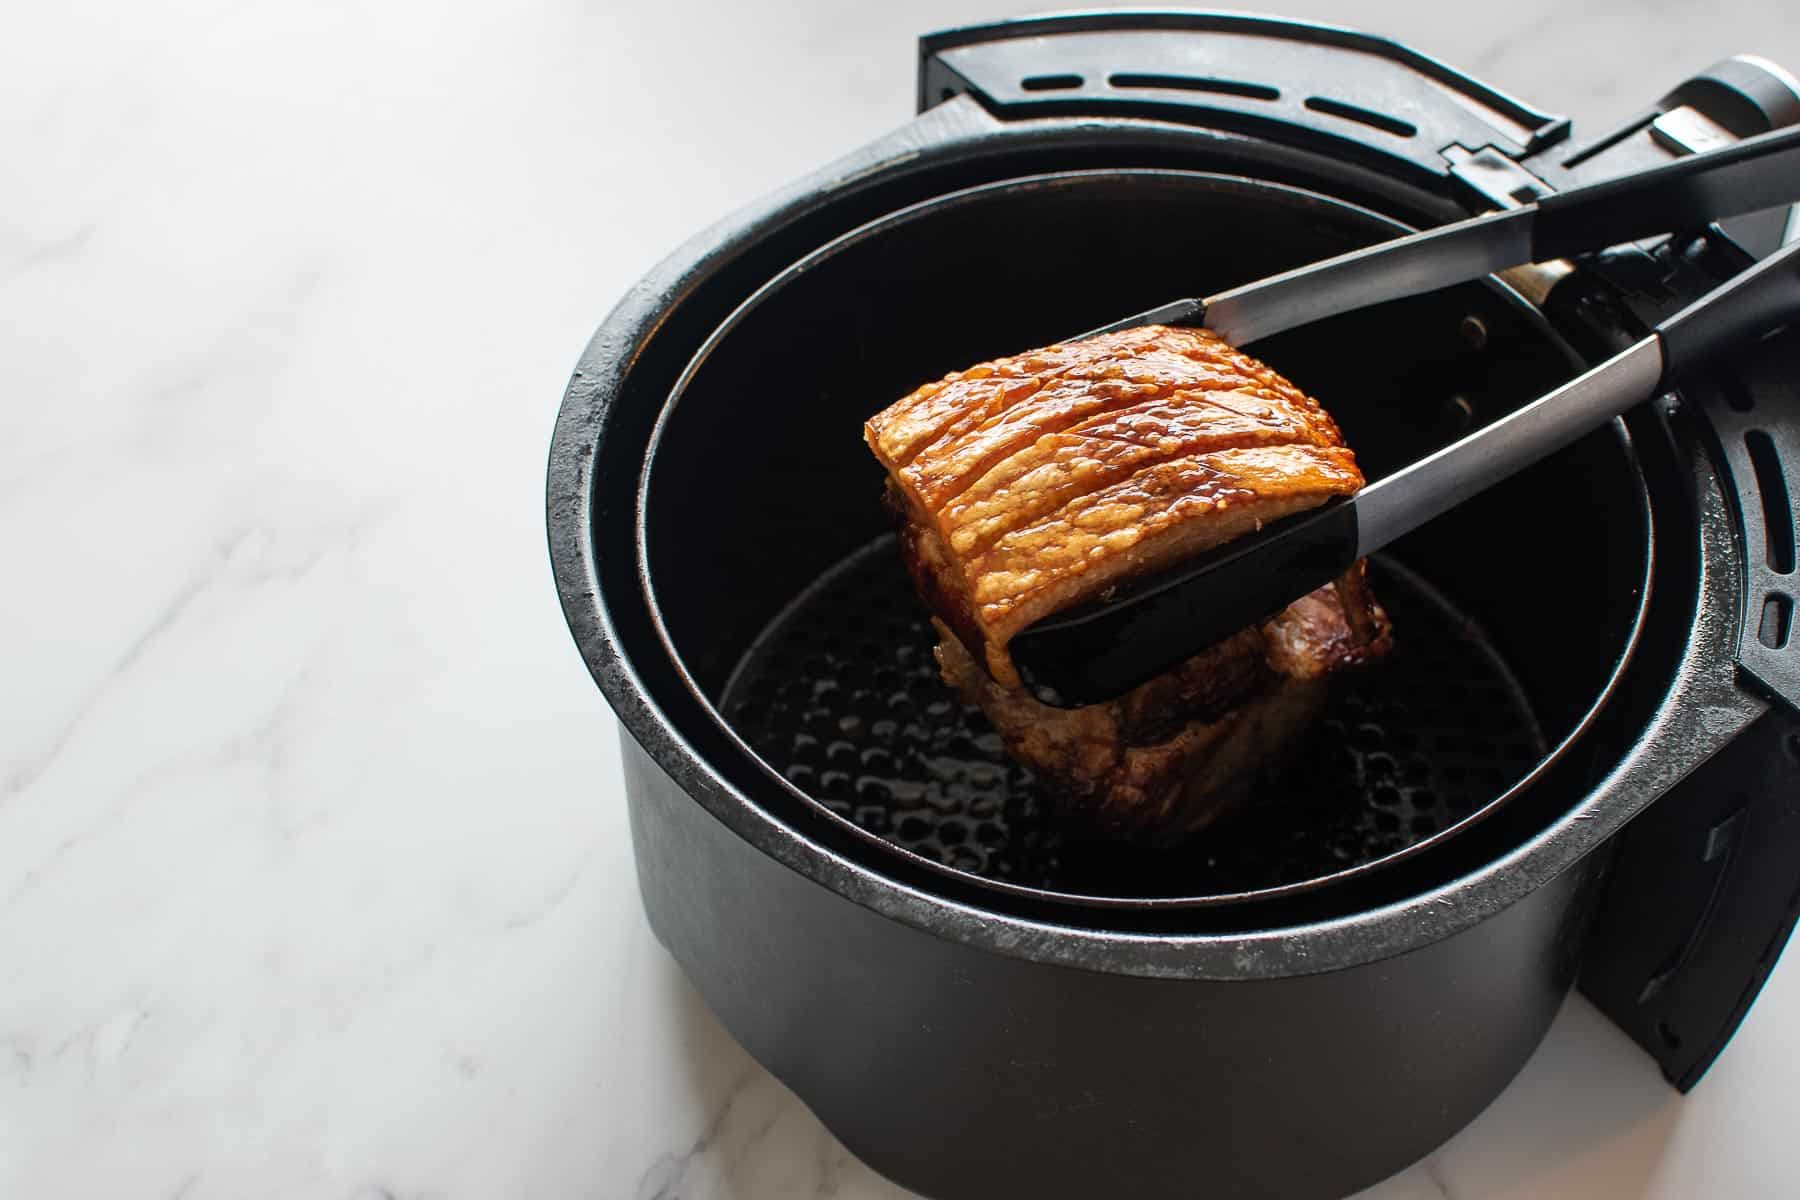 How To Cook A Pork Roast In An Air Fryer